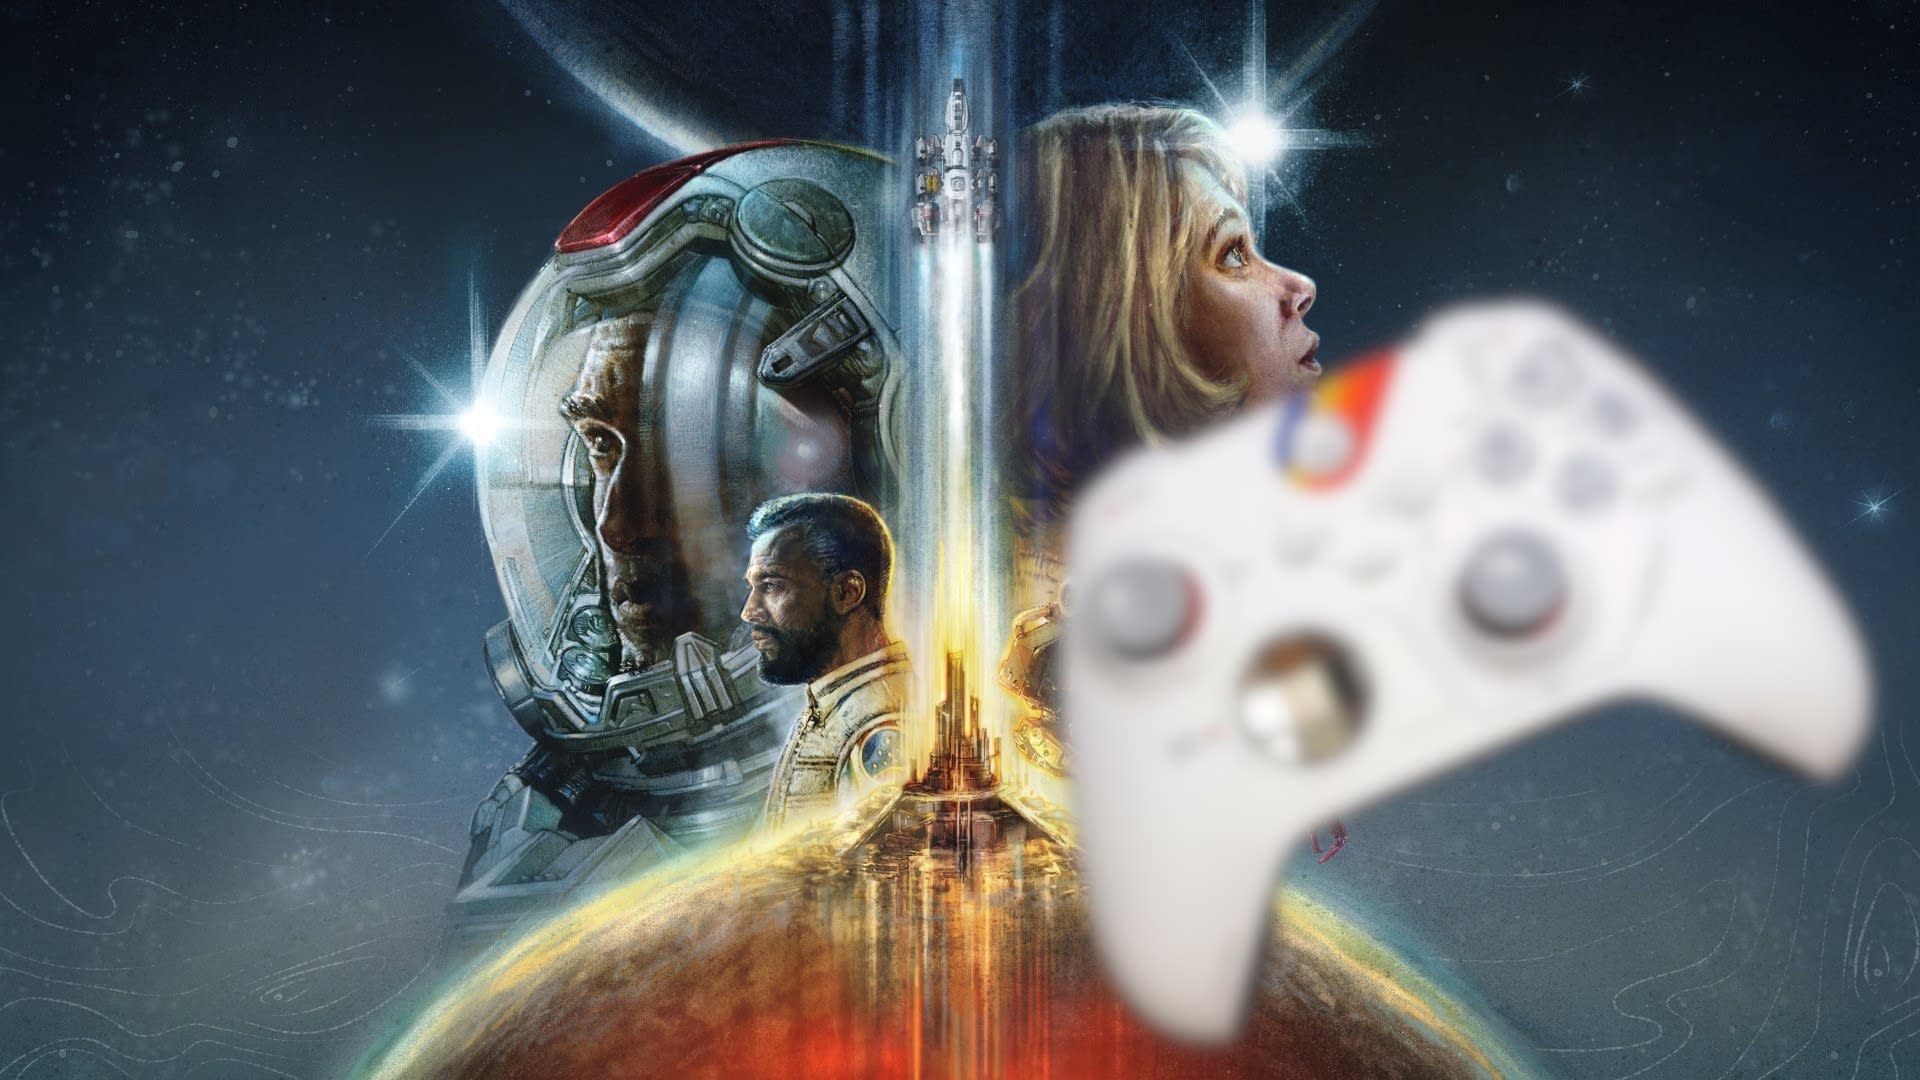 Starfield theme Xbox controller can be leaked